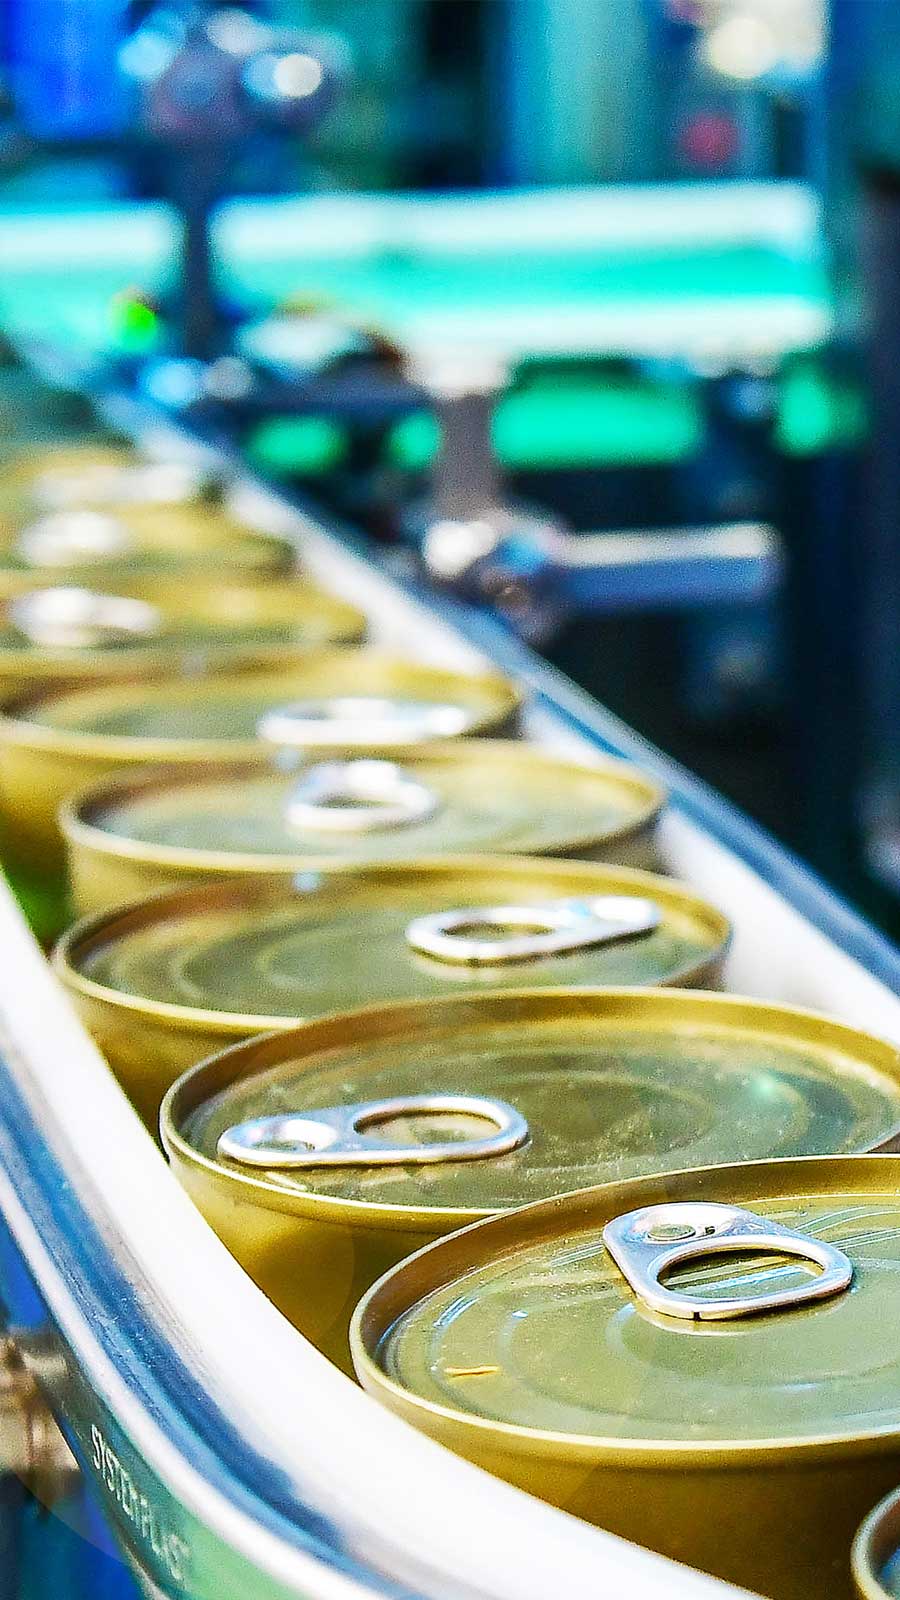 Manufacturing operation of canned food